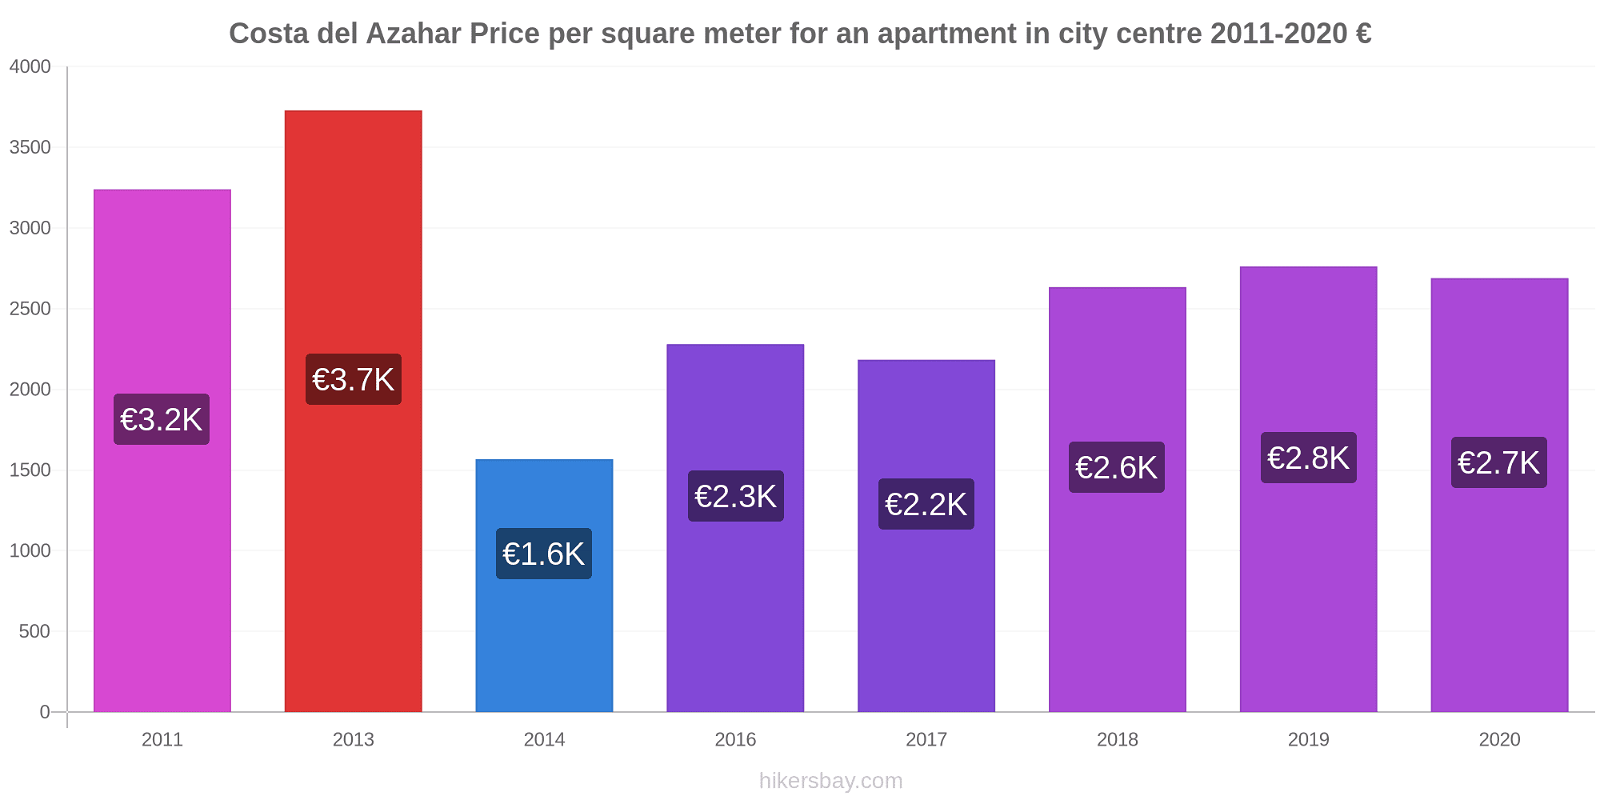 Costa del Azahar price changes Price per square meter for an apartment in city centre hikersbay.com